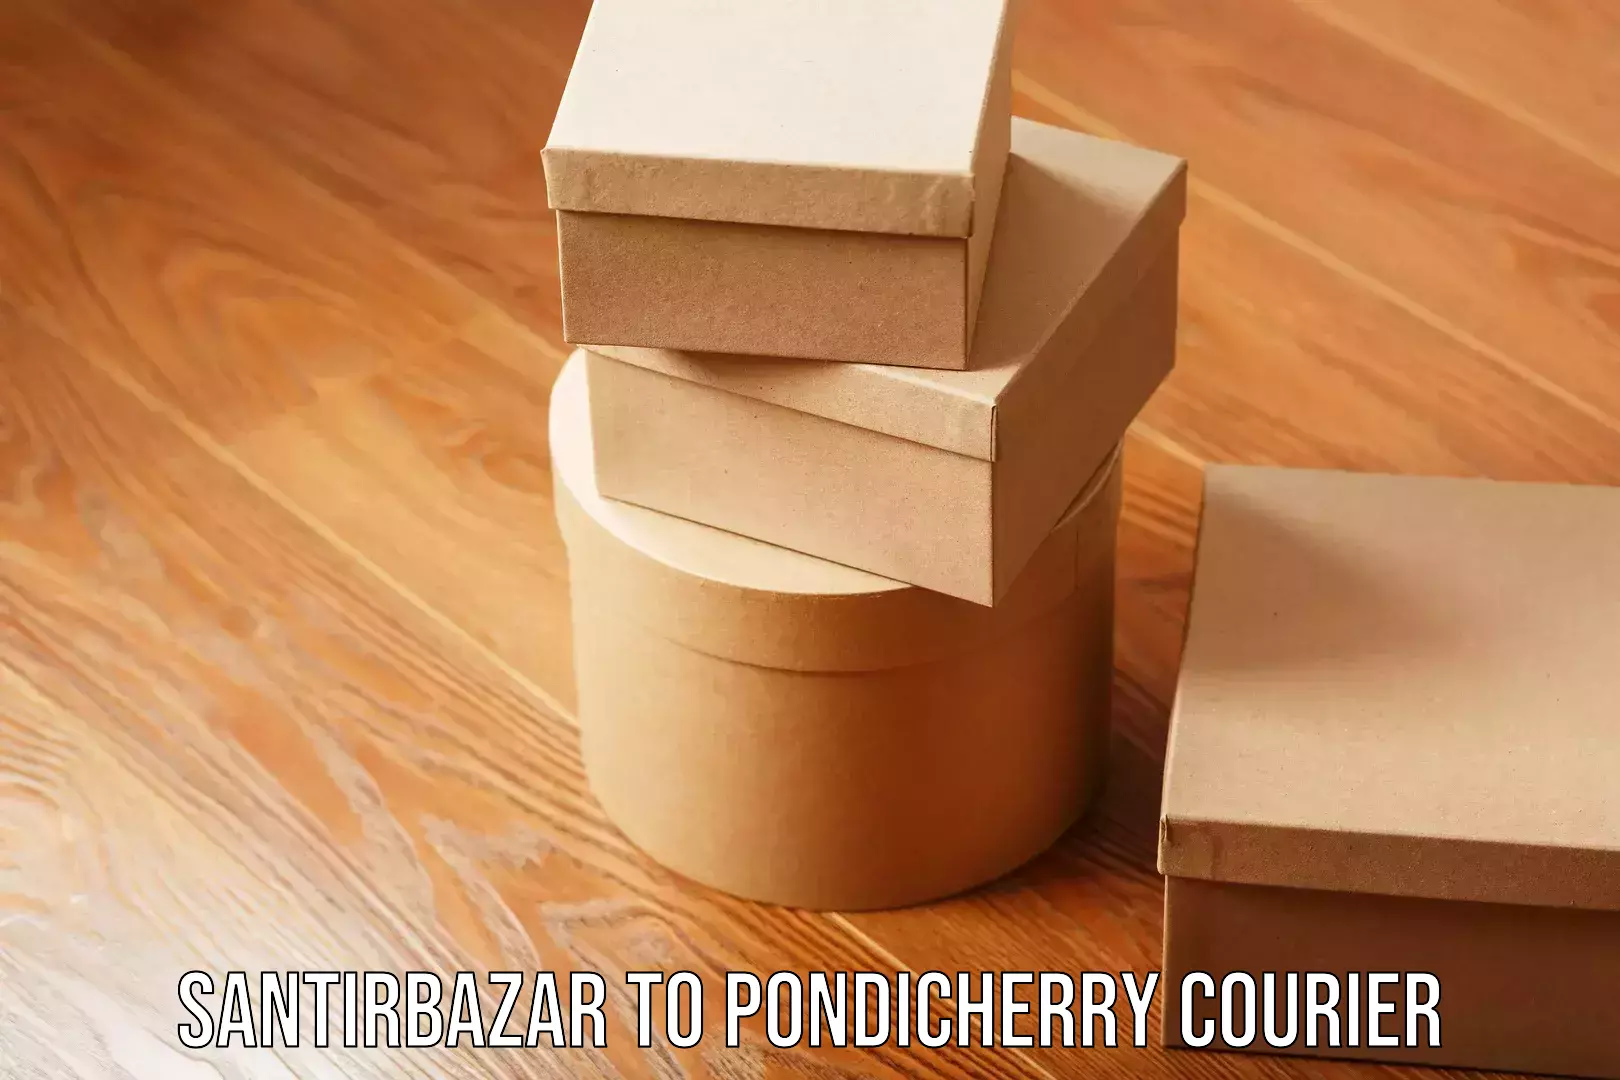 State-of-the-art courier technology Santirbazar to Pondicherry